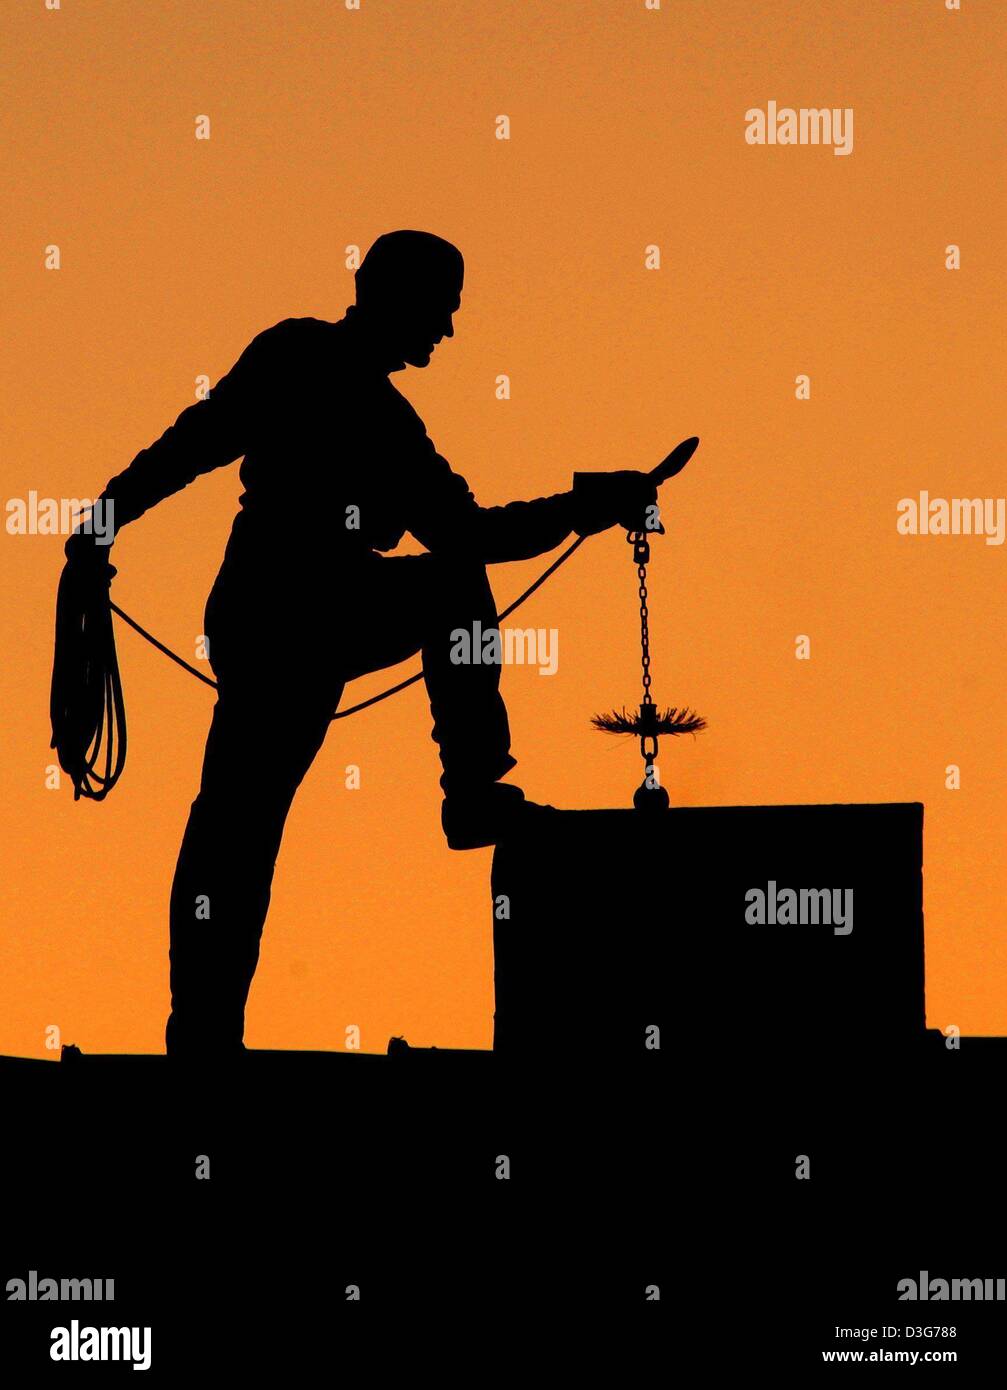 (dpa) - The silhouette of a chimney sweep is seen at work against the orange sky at dawn in Muellrose, Germany, 12 November 2003. At the beginning of winter the high season for chimney sweeps has started as they have to clear the chimneys of soot to attain ideal heating conditions for ovens. Stock Photo